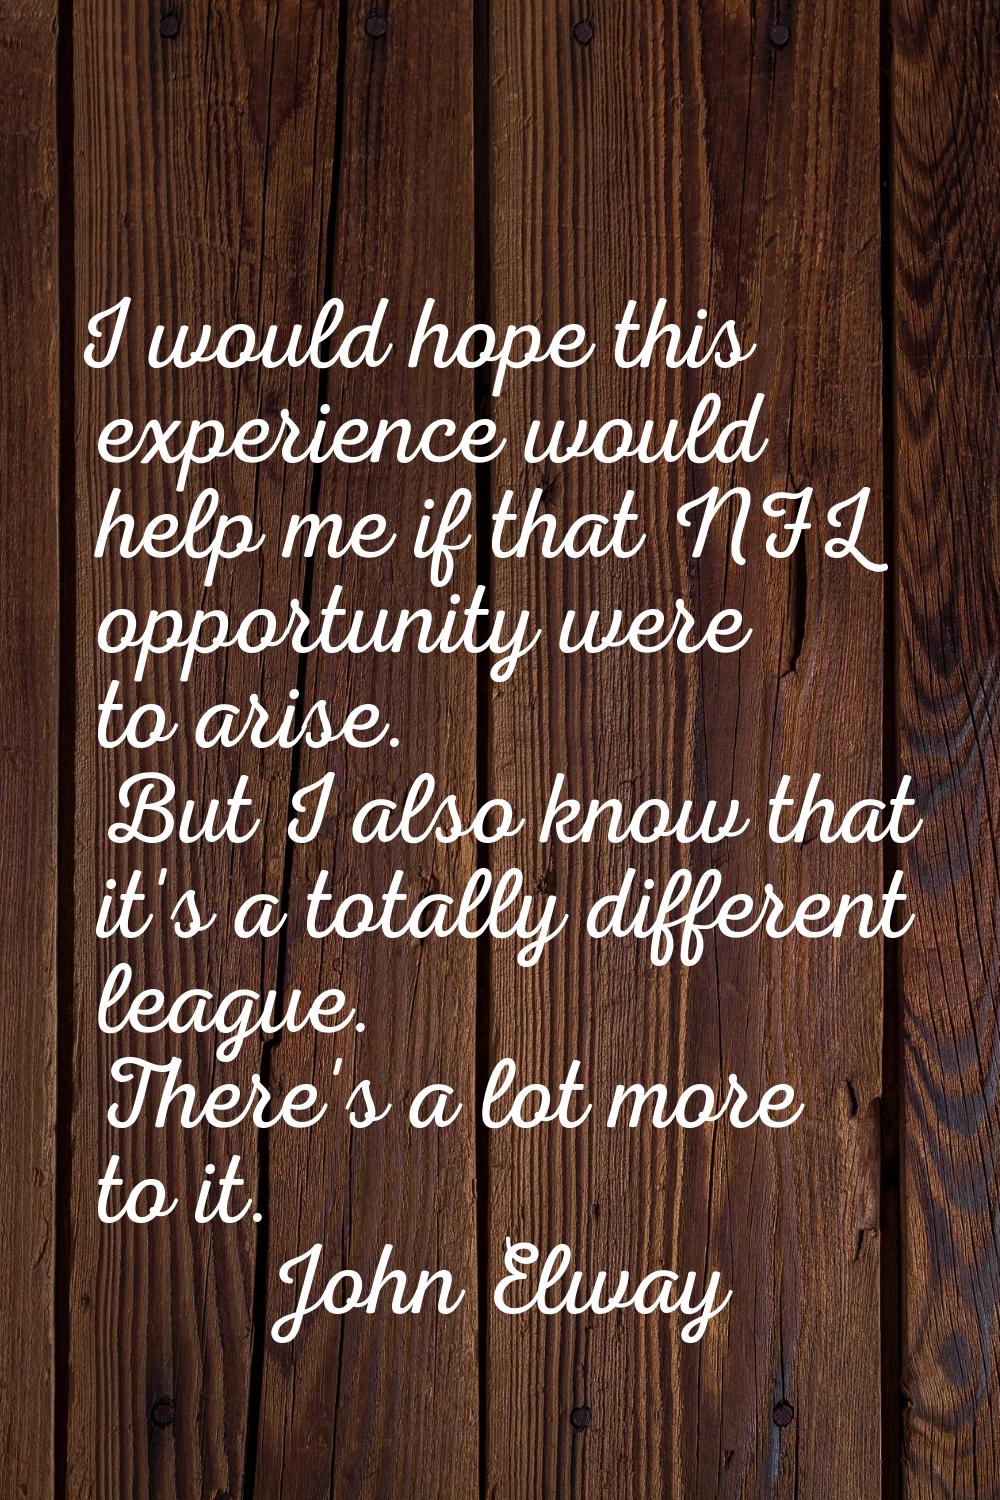 I would hope this experience would help me if that NFL opportunity were to arise. But I also know t